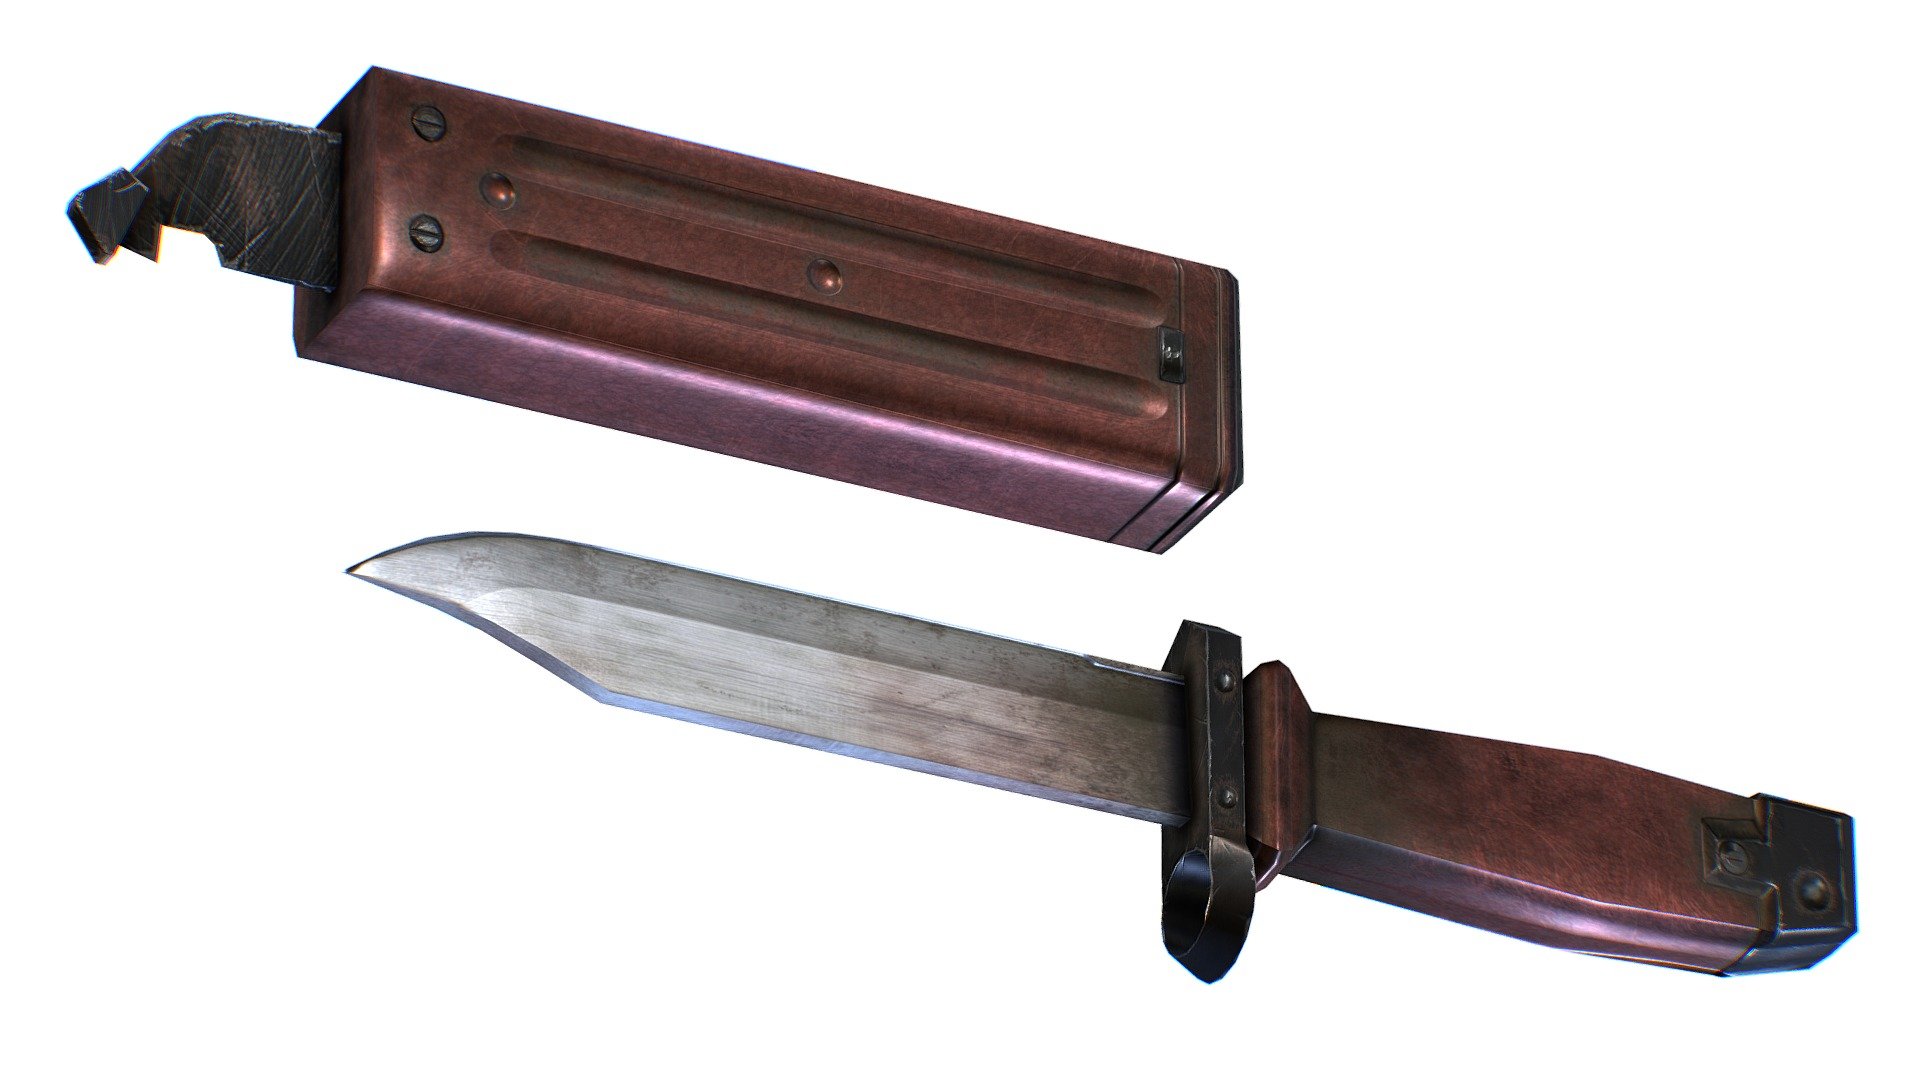 Bayonet Knife with Scabbard UTD Training  RK 6*4 LowPoly model -1024x1024 textures, 3dsMaya file included 3d model